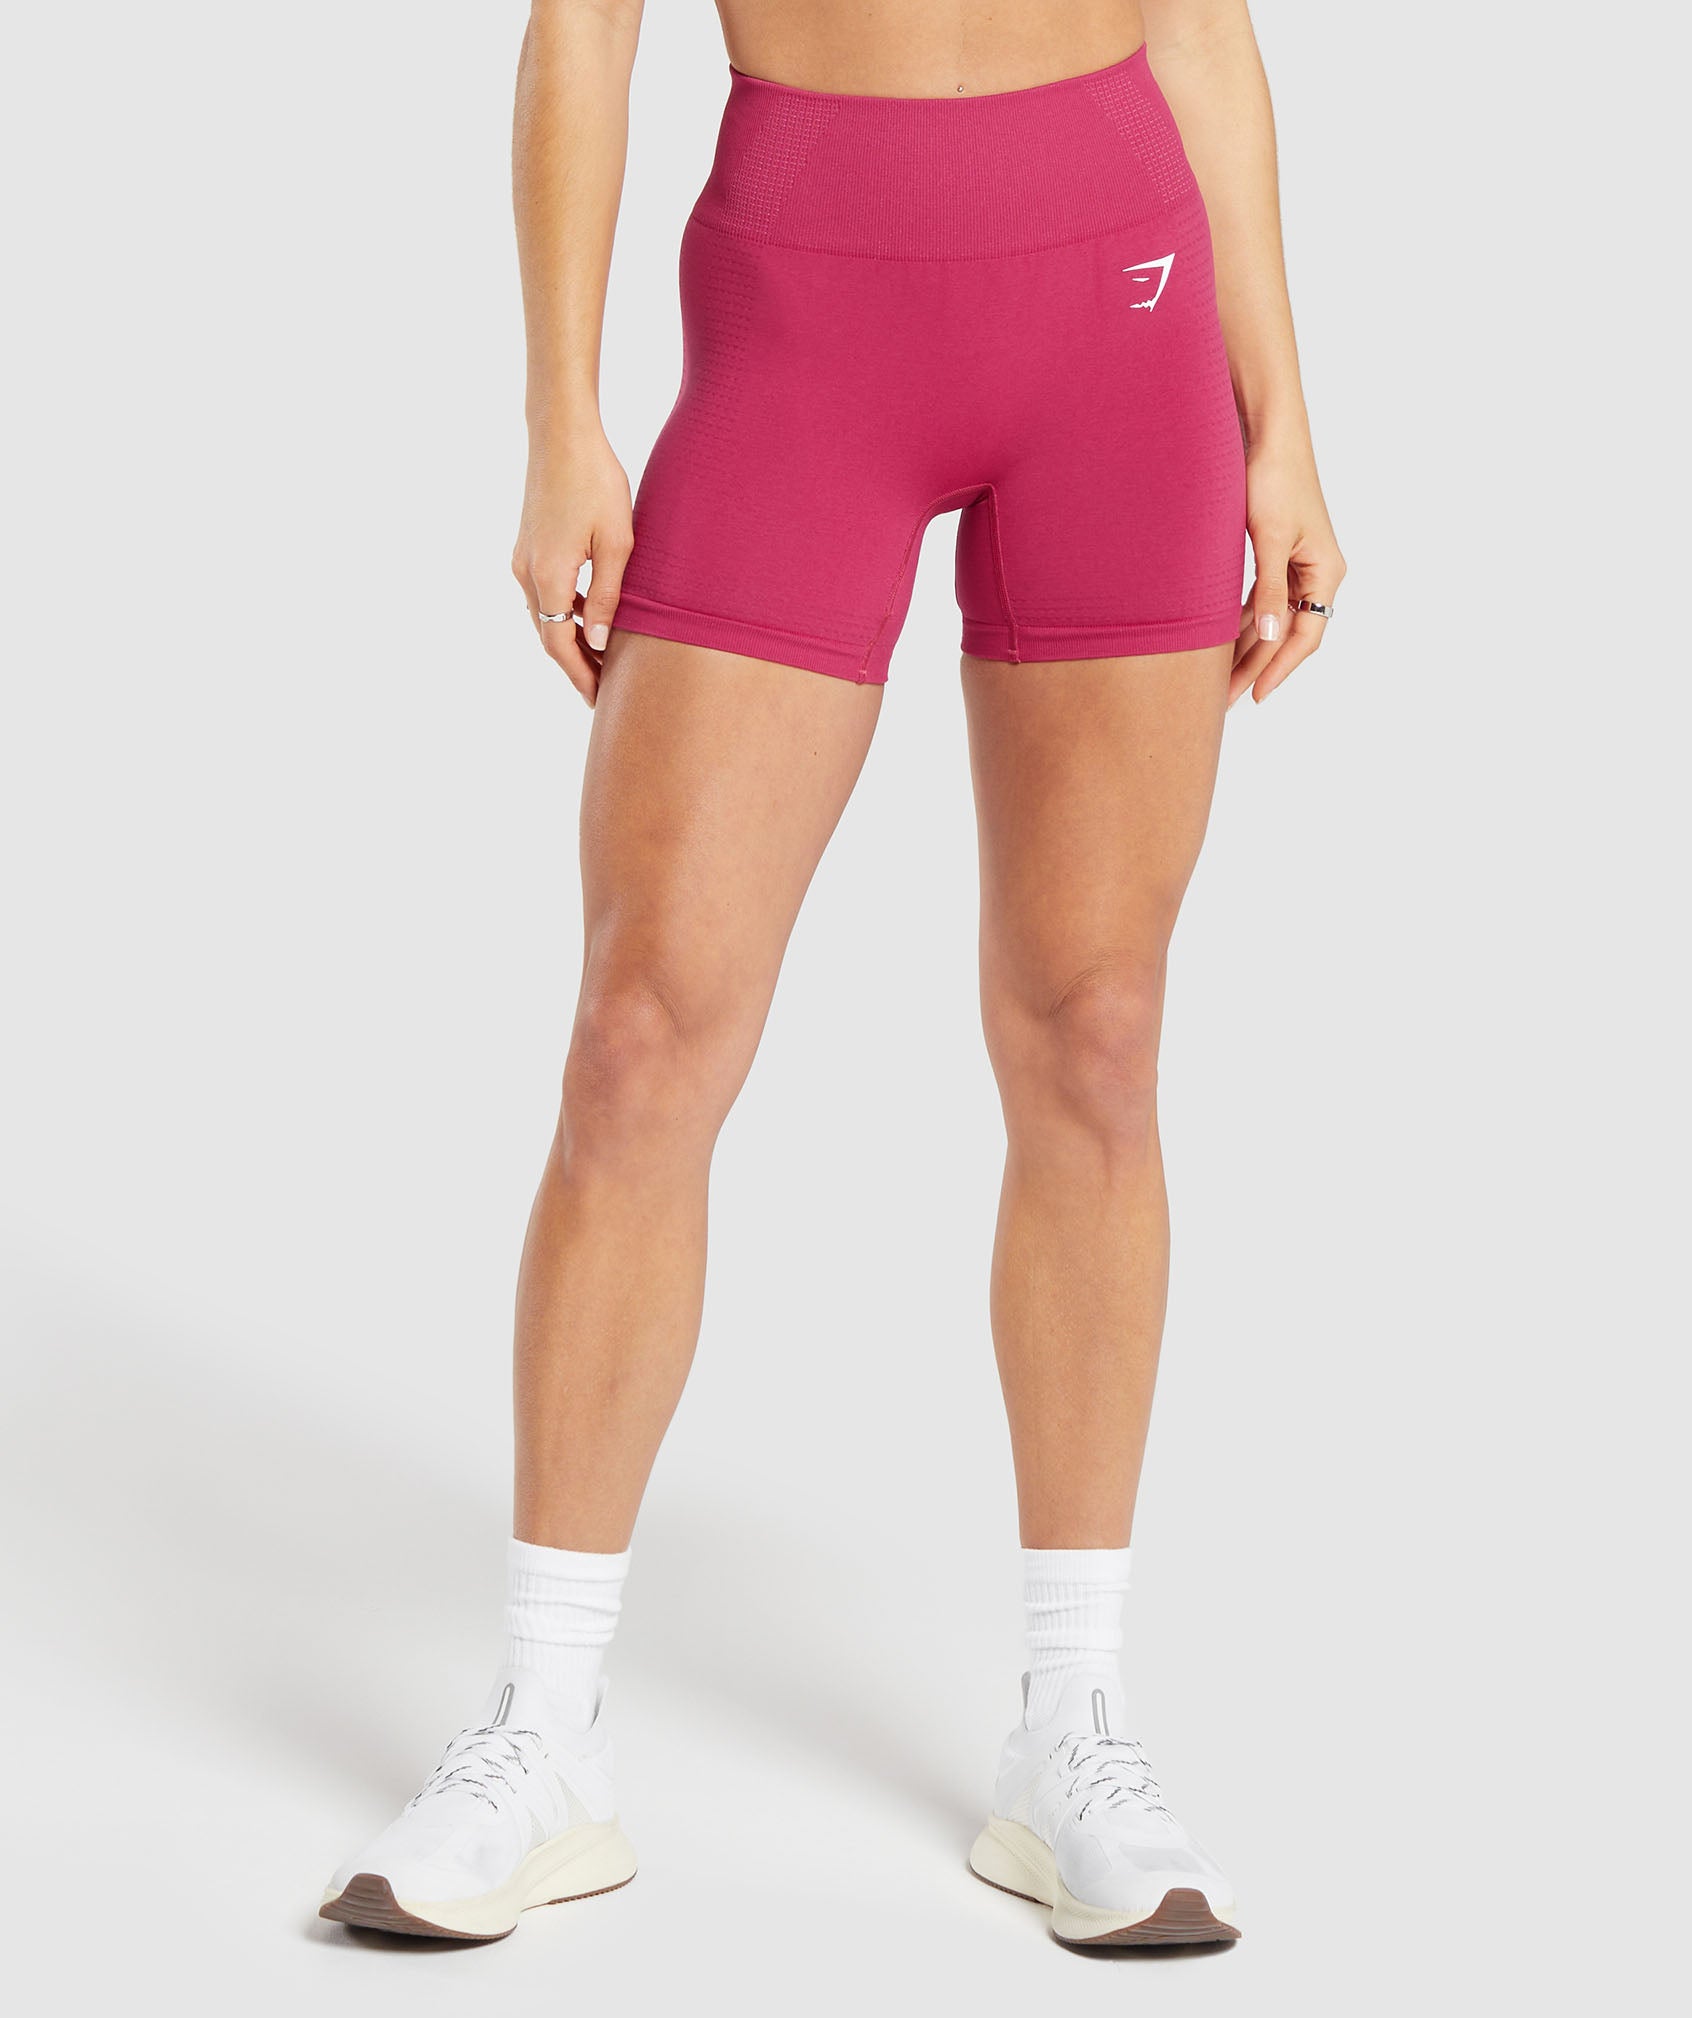 Vital Seamless 2.0 Shorts in Vintage Pink/Marl is out of stock